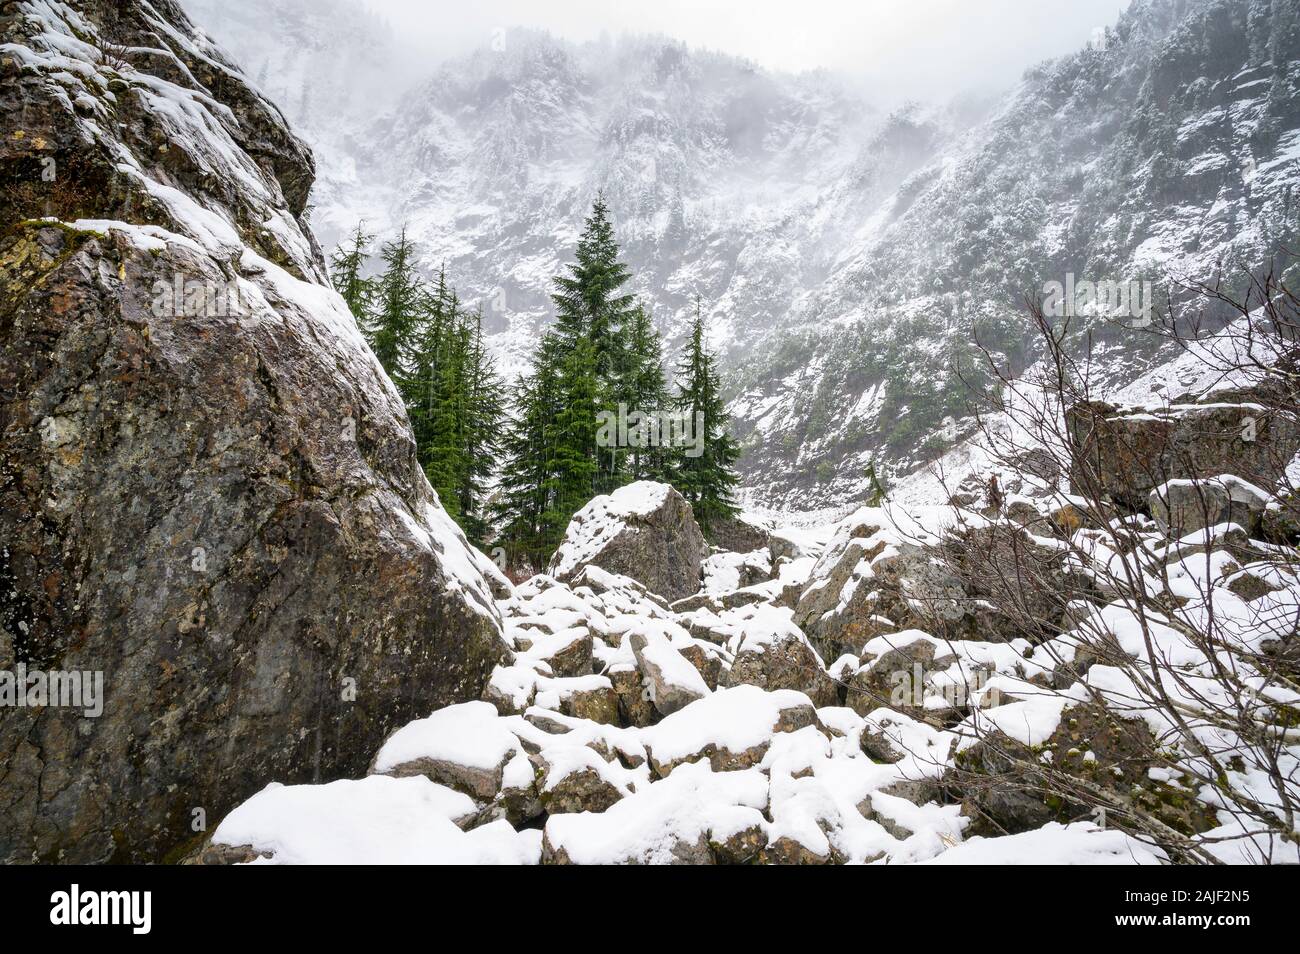 Foggy Mountain Trees and Boulders With Snow Stock Photo